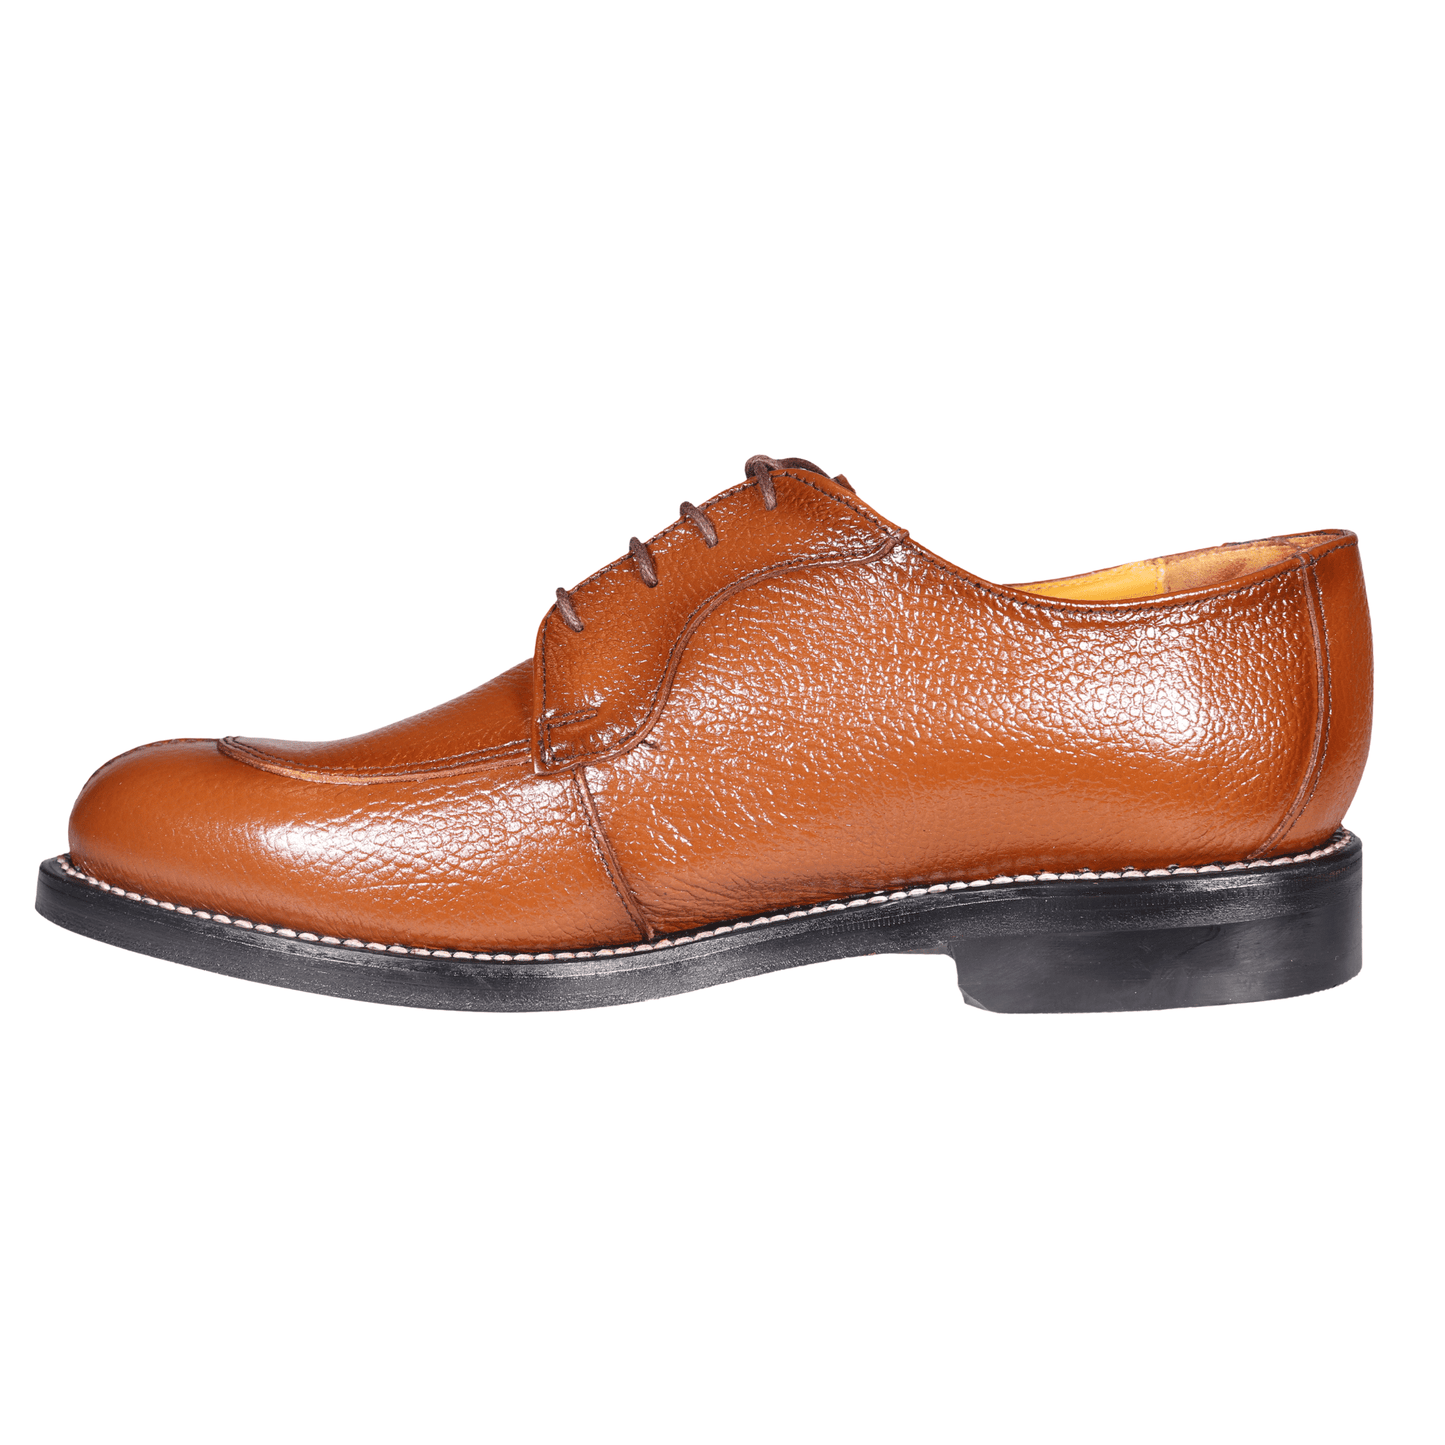 Johnston & Murphy Tan Welted Lace-up